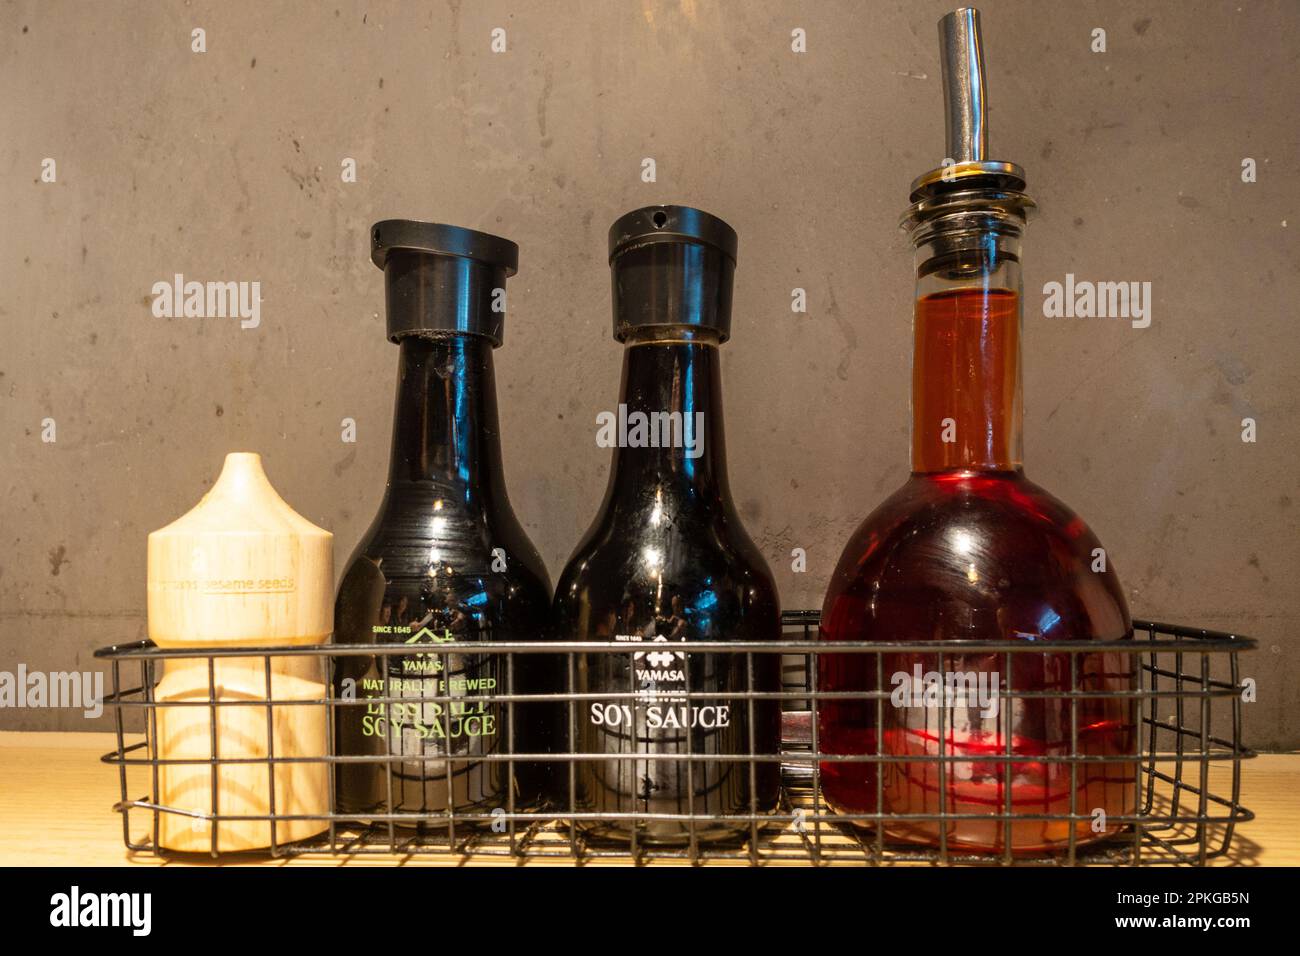 Bottles of soy sauce and chilli oil in a metal mesh basket at a restaurant Stock Photo